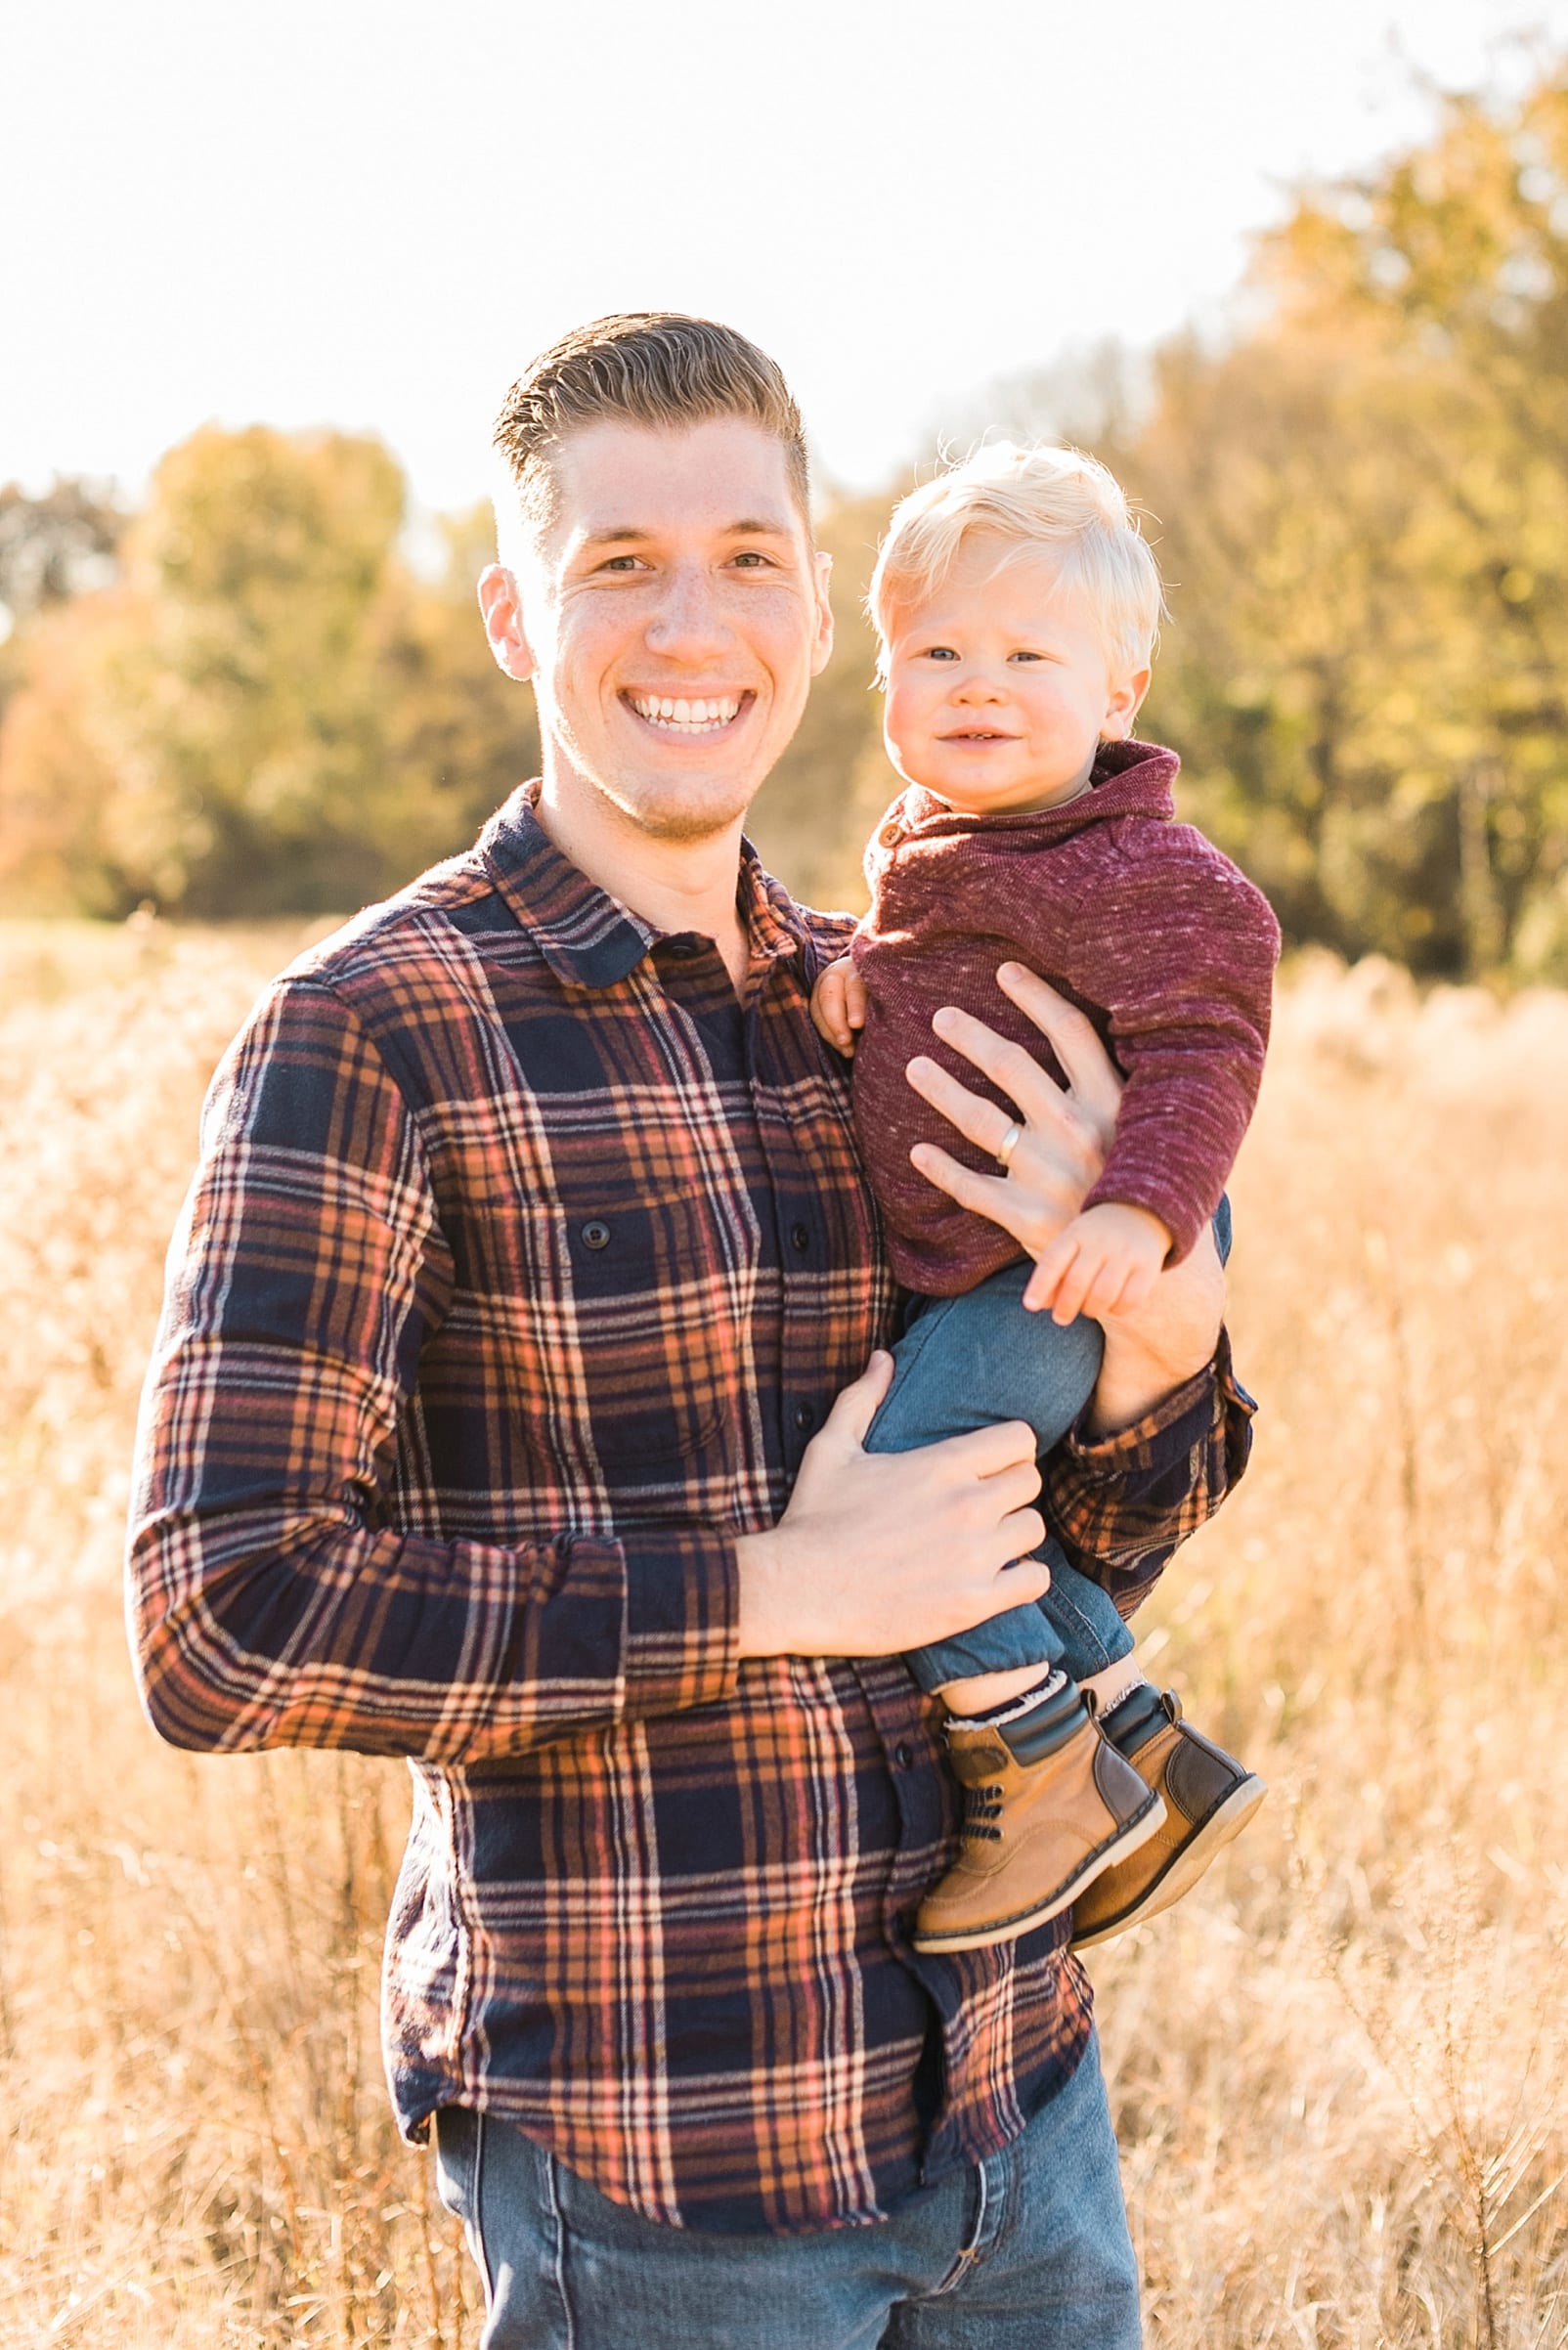 Wake forest father with his 16 month old son photo